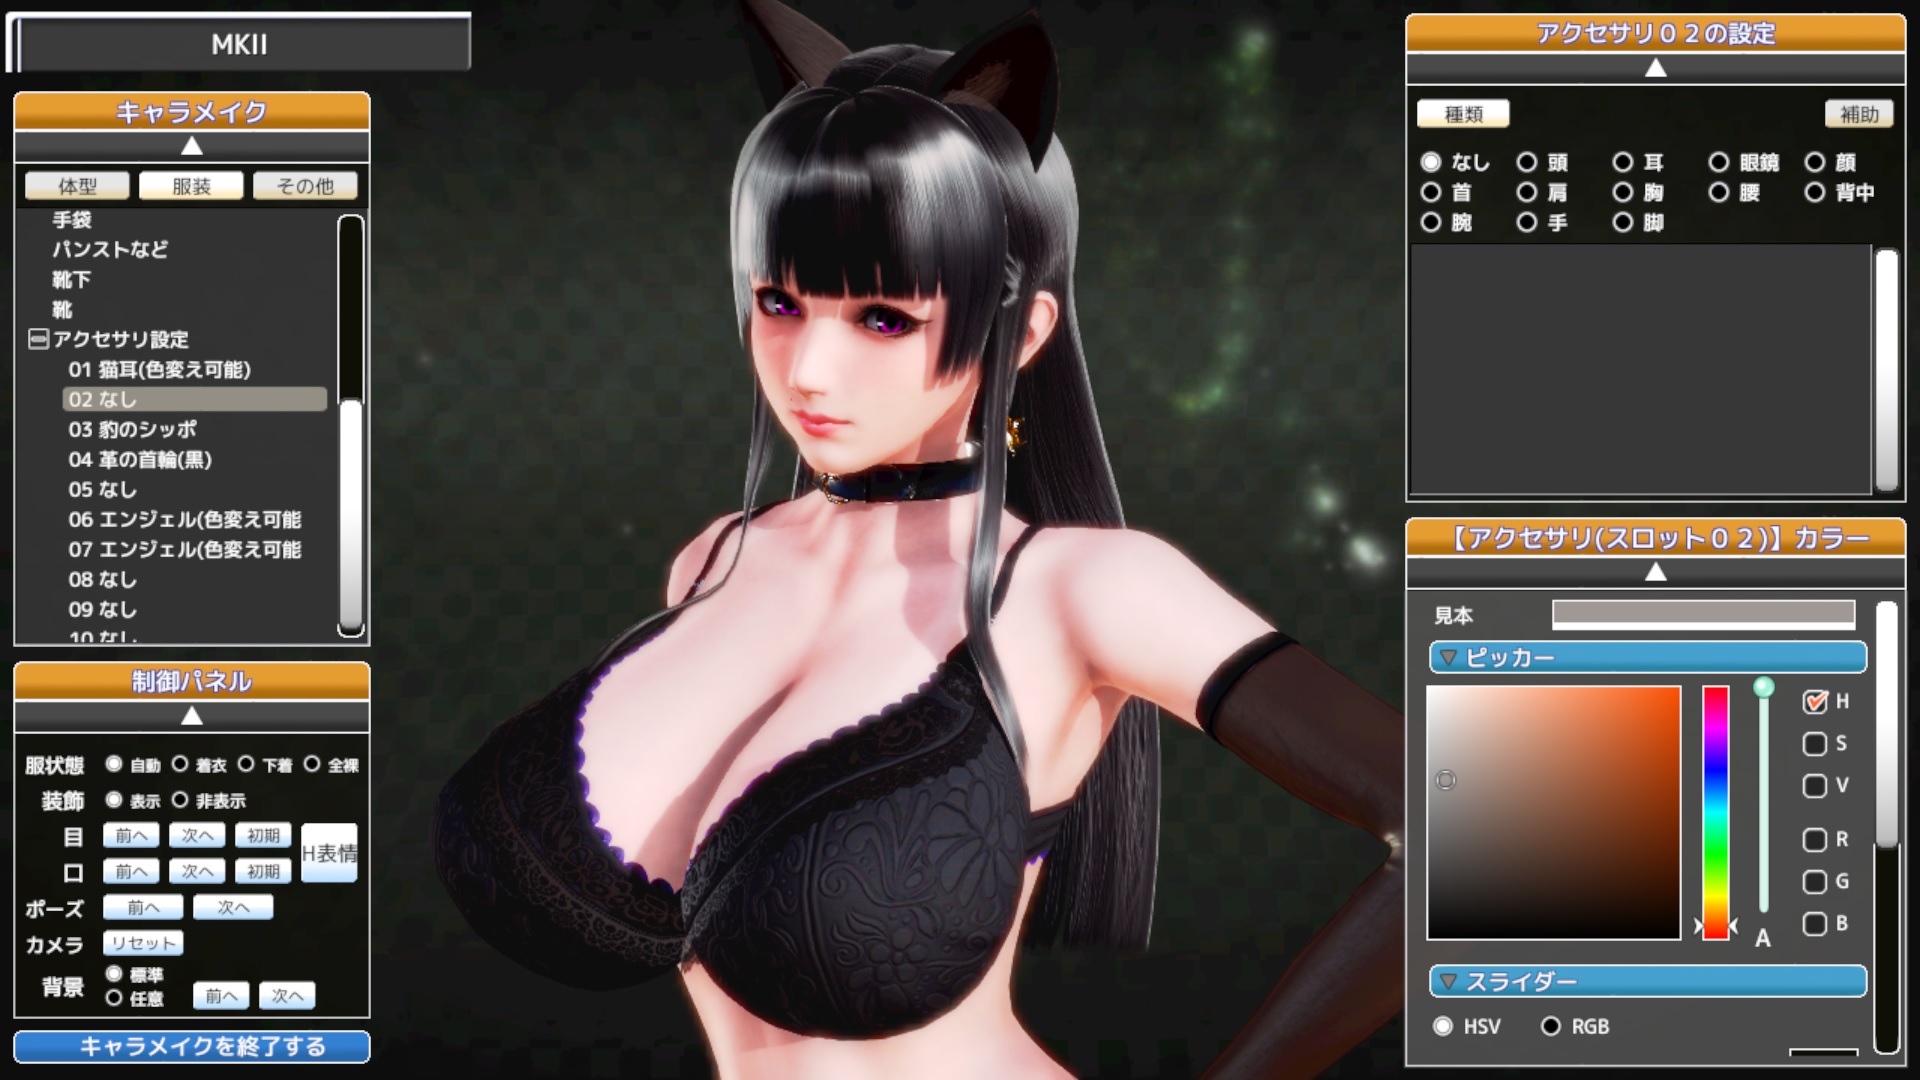 free download models for honey select